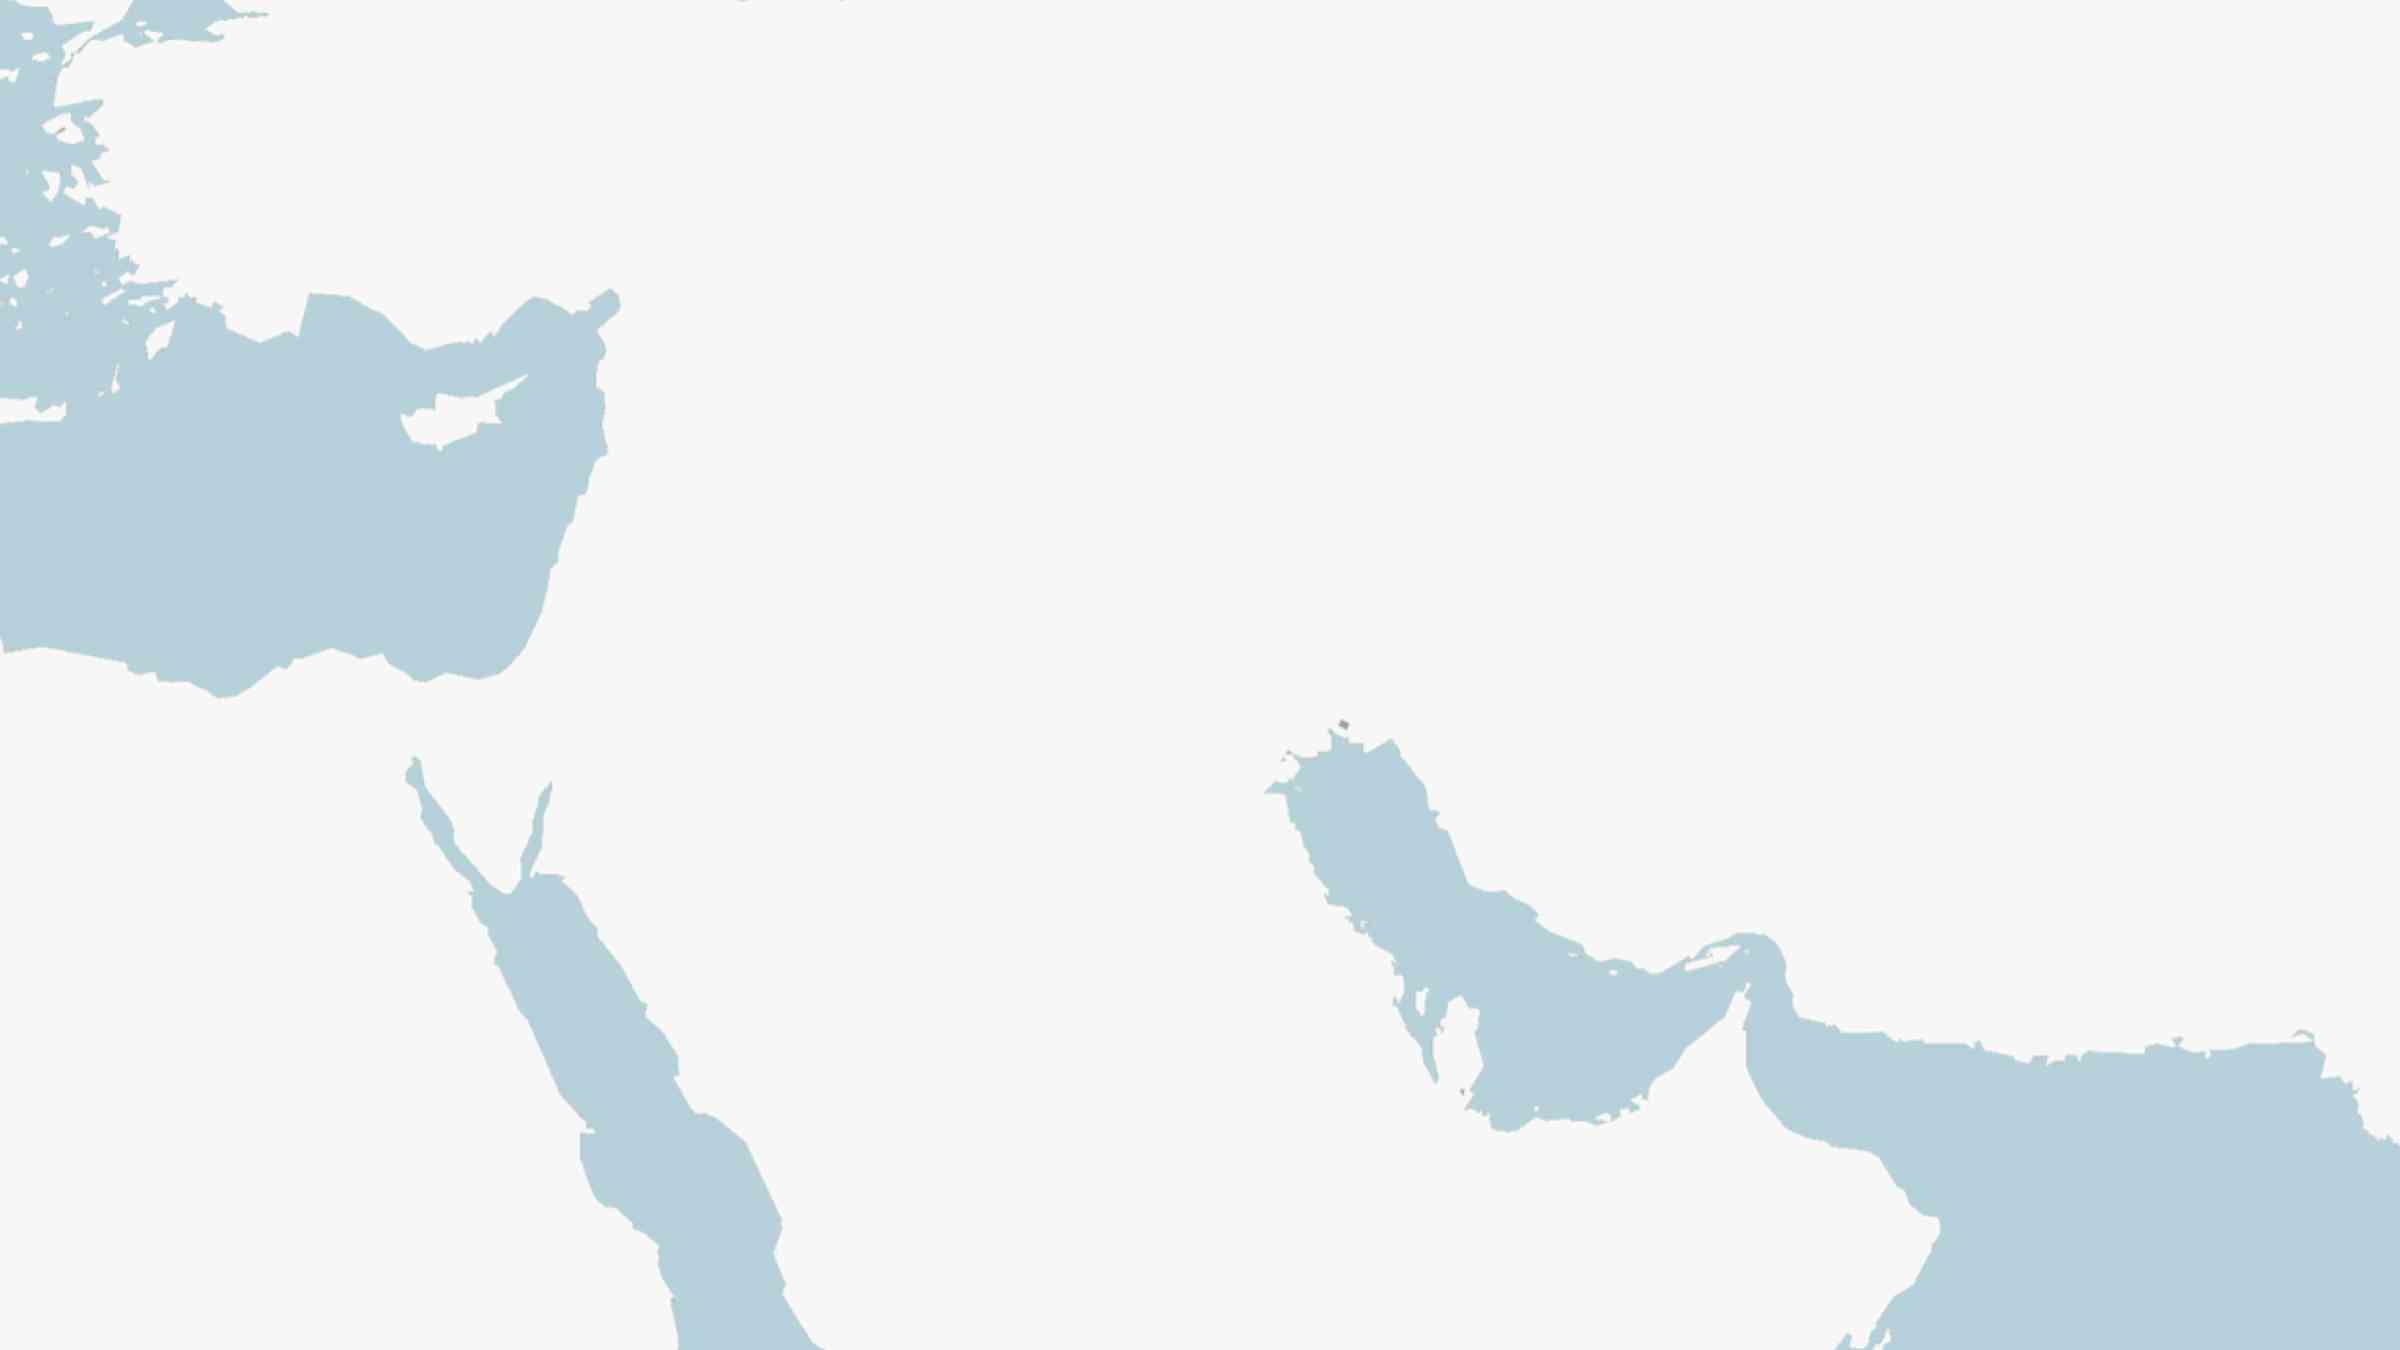 A blank map of the Arab states region 